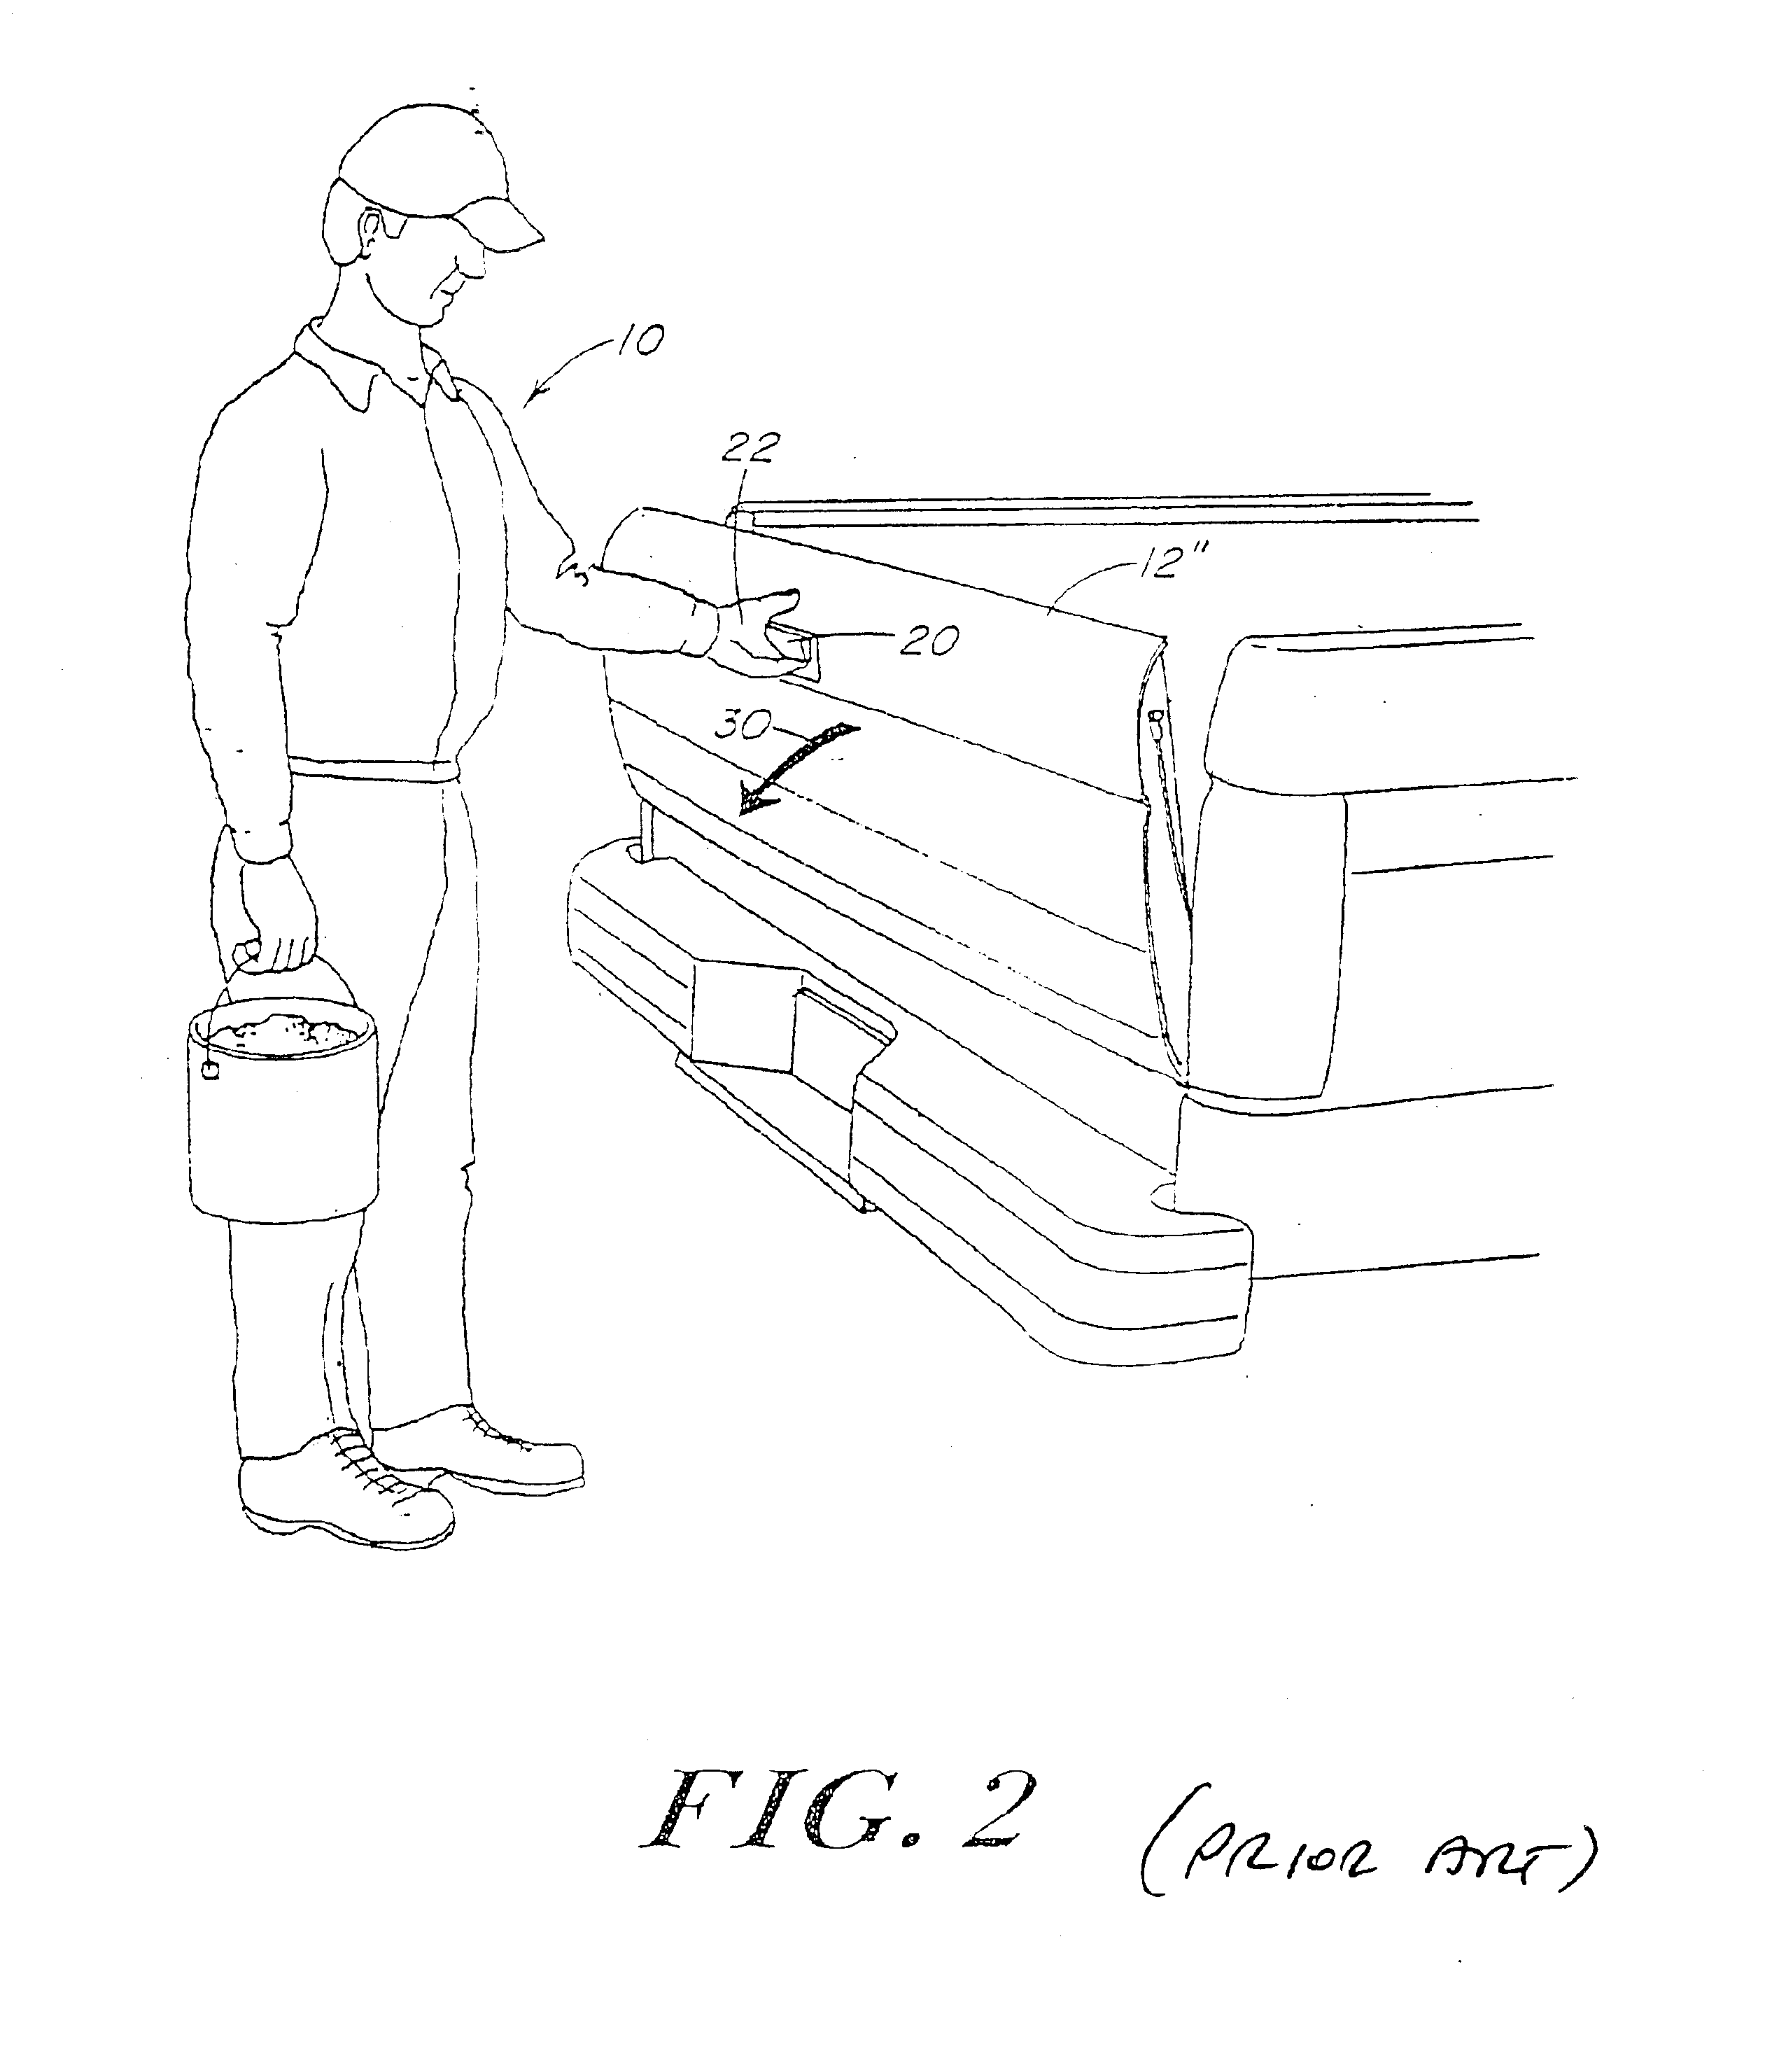 Method and apparatus for assisting in the lowering and raising of a tailgate